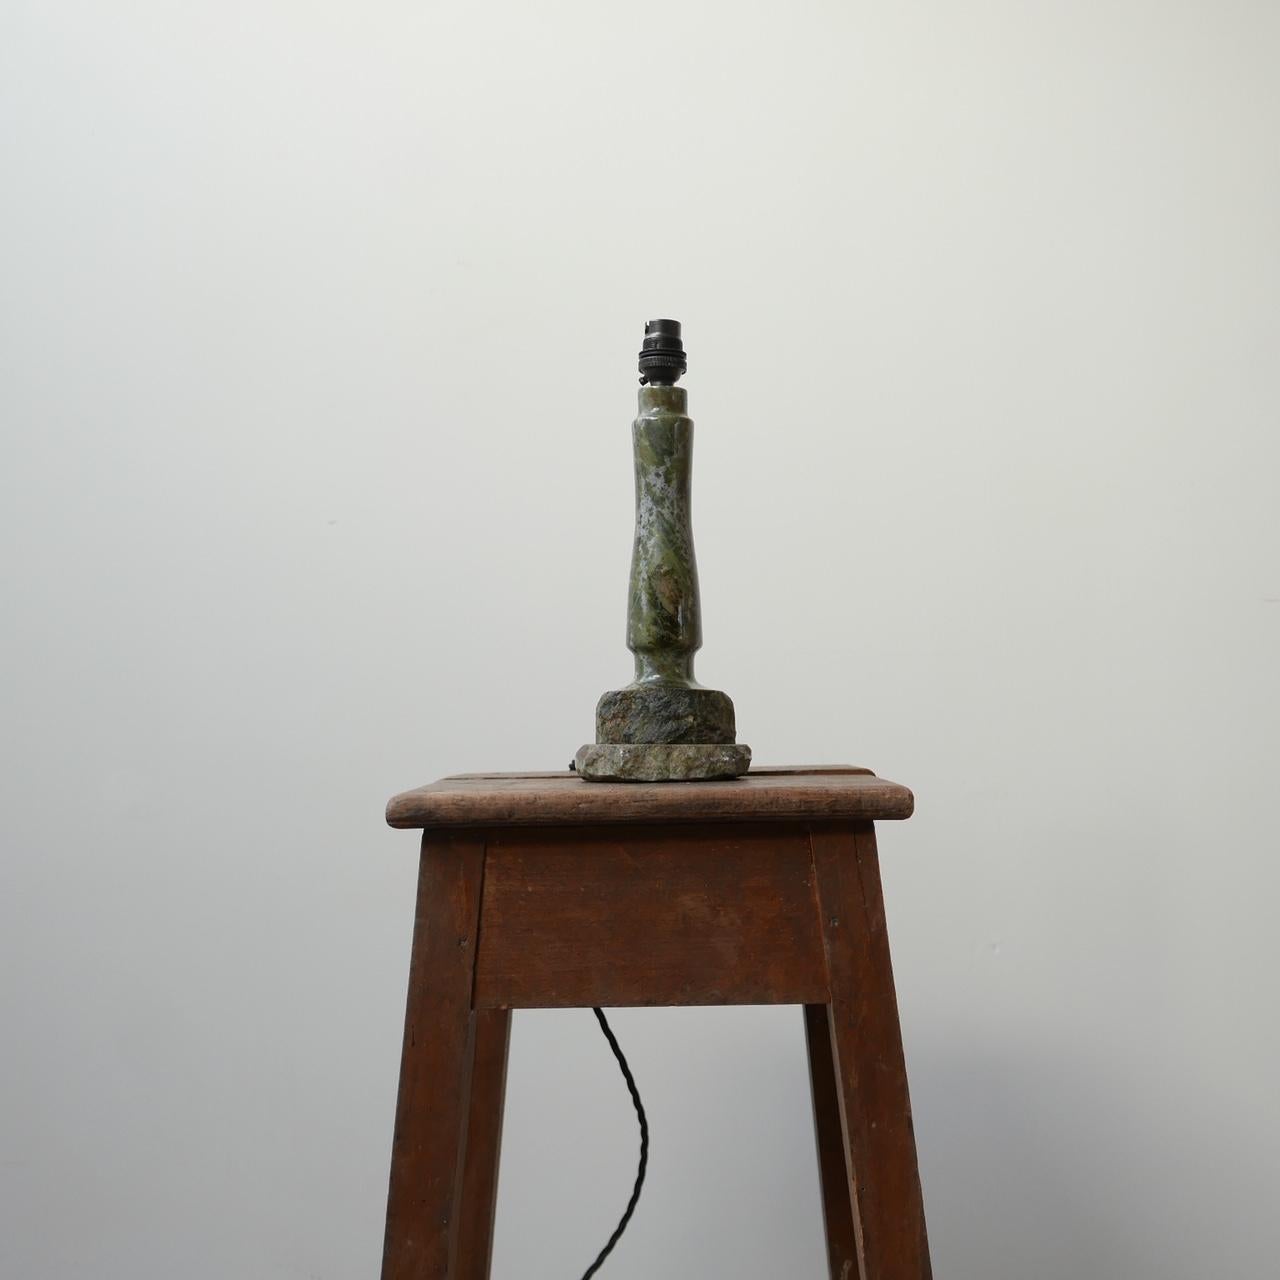 A cornish stone table lamp.

Likely carved in the form of a lighthouse.

Cornwall, England, mid to late 20th century.

Re-wired with black silk flex.

A similar lamp is available separately at the time of listing.

Dimensions: 11 W x 9 D x